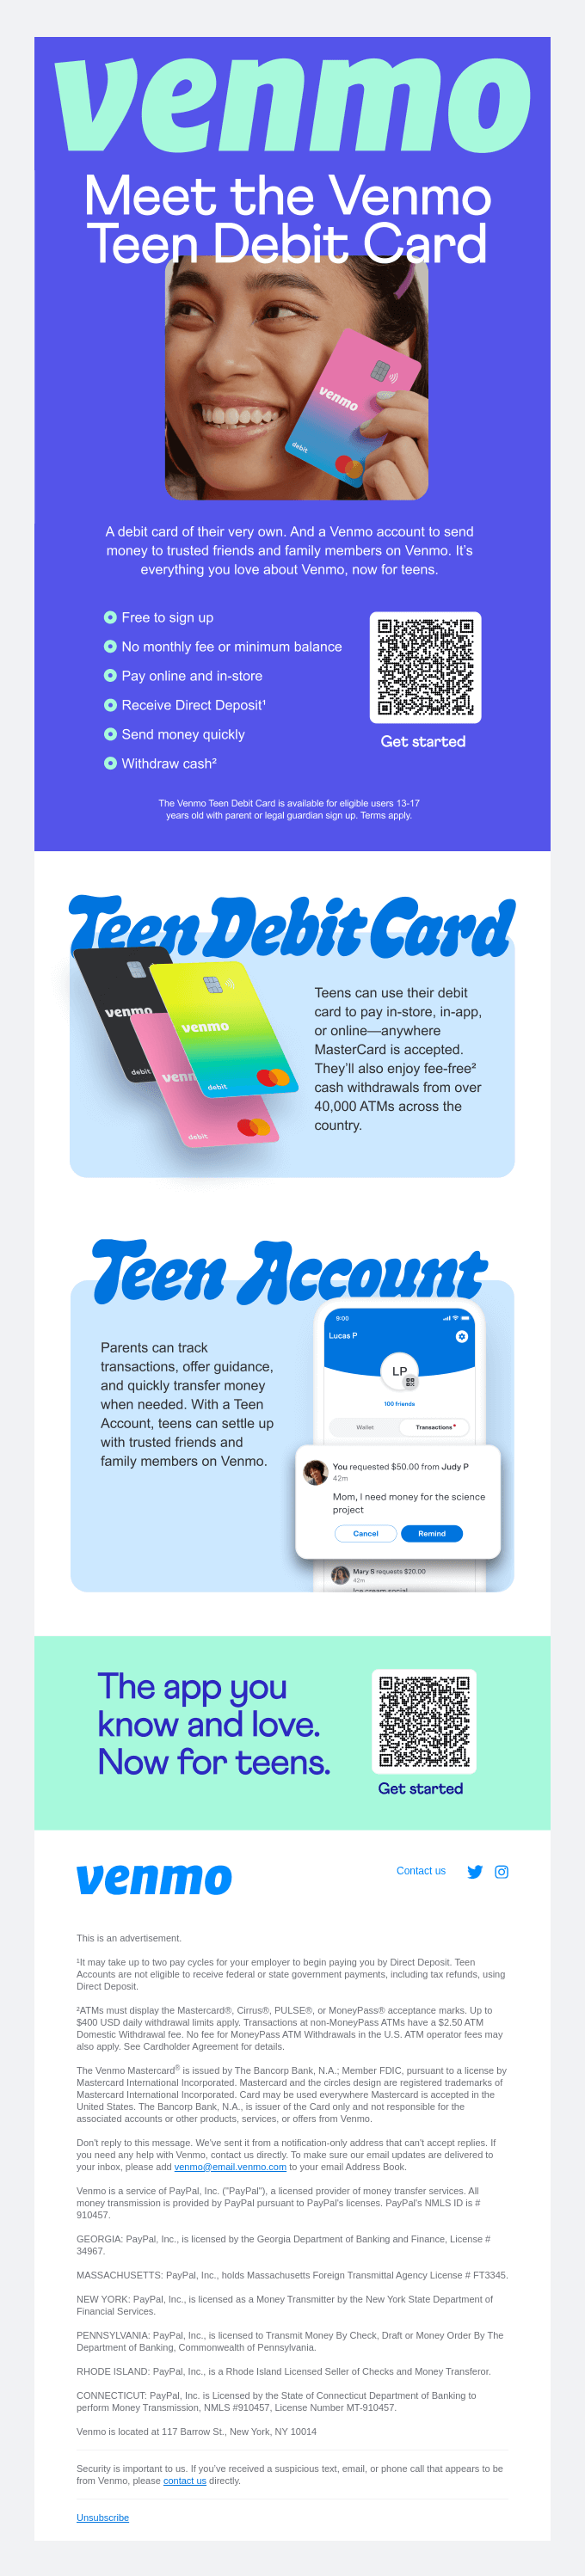 Venmo, now for ages 13-17